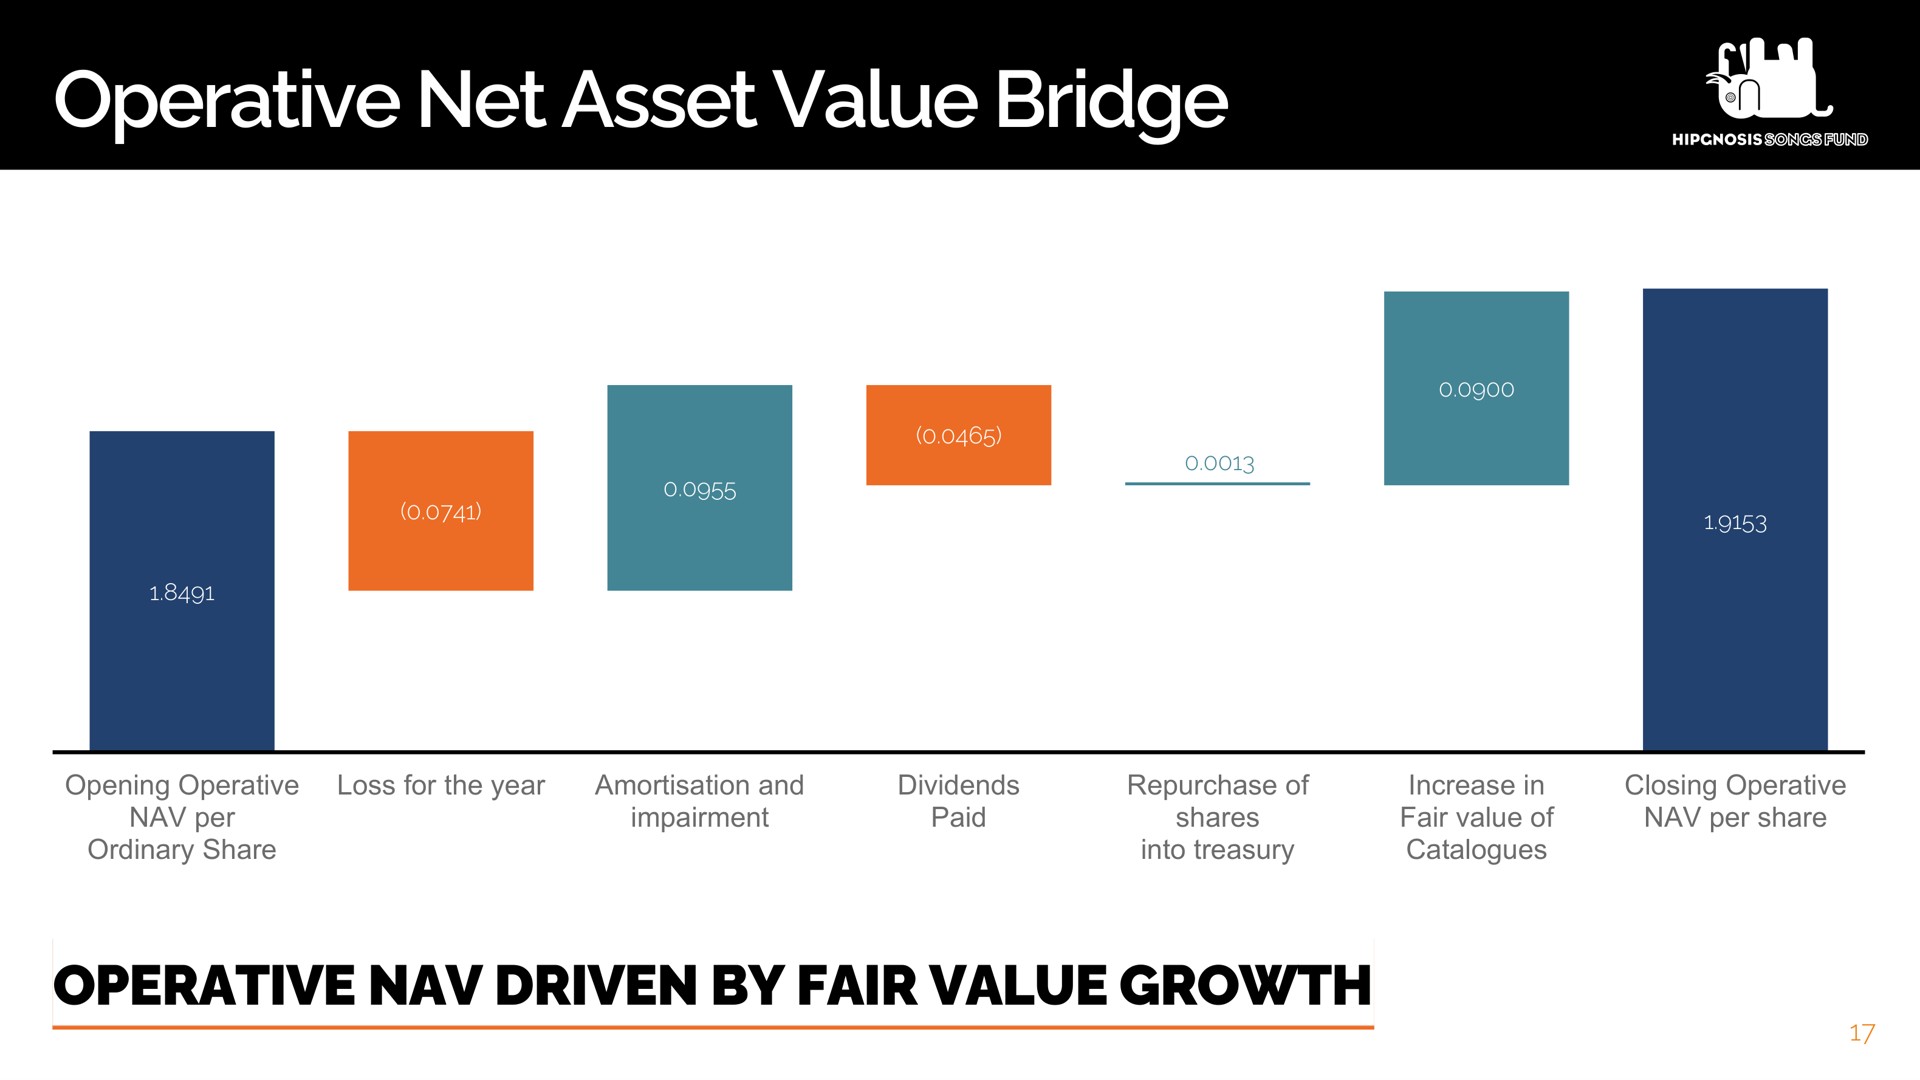 operative net asset value bridge driven by fair growth | Hipgnosis Songs Fund